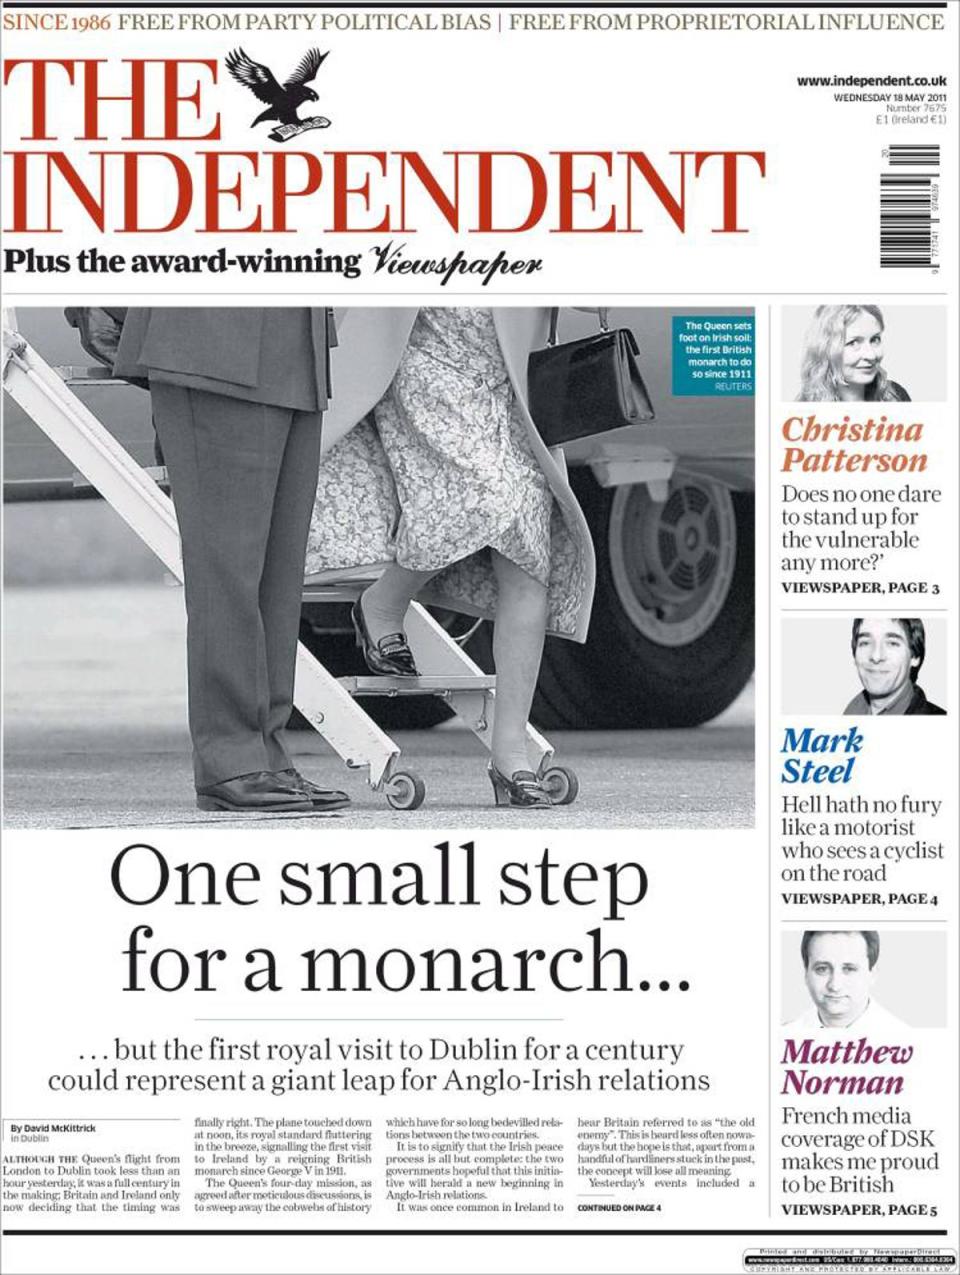 The Independent’s front cover from 18 May, 2011, as the Queen became the first monarch to visit the Republic of Ireland in 100 years (The Independent)